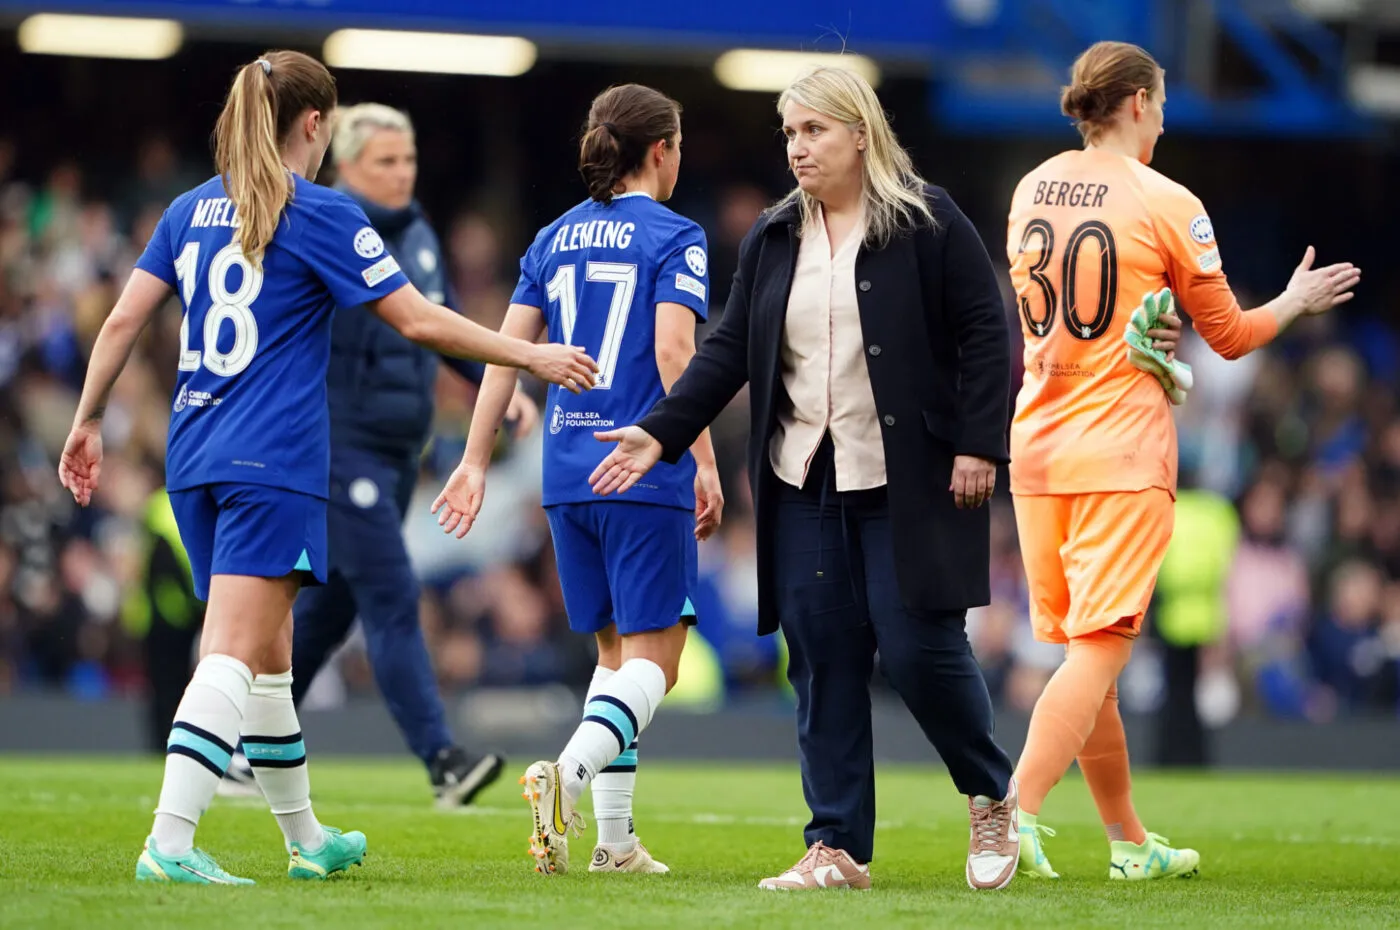 Chelsea manager Emma Hayes at the final whistle following the UEFA Women's Champions League semi-final first leg match at Stamford Bridge, London. Picture date: Saturday April 22, 2023. - Photo by Icon sport